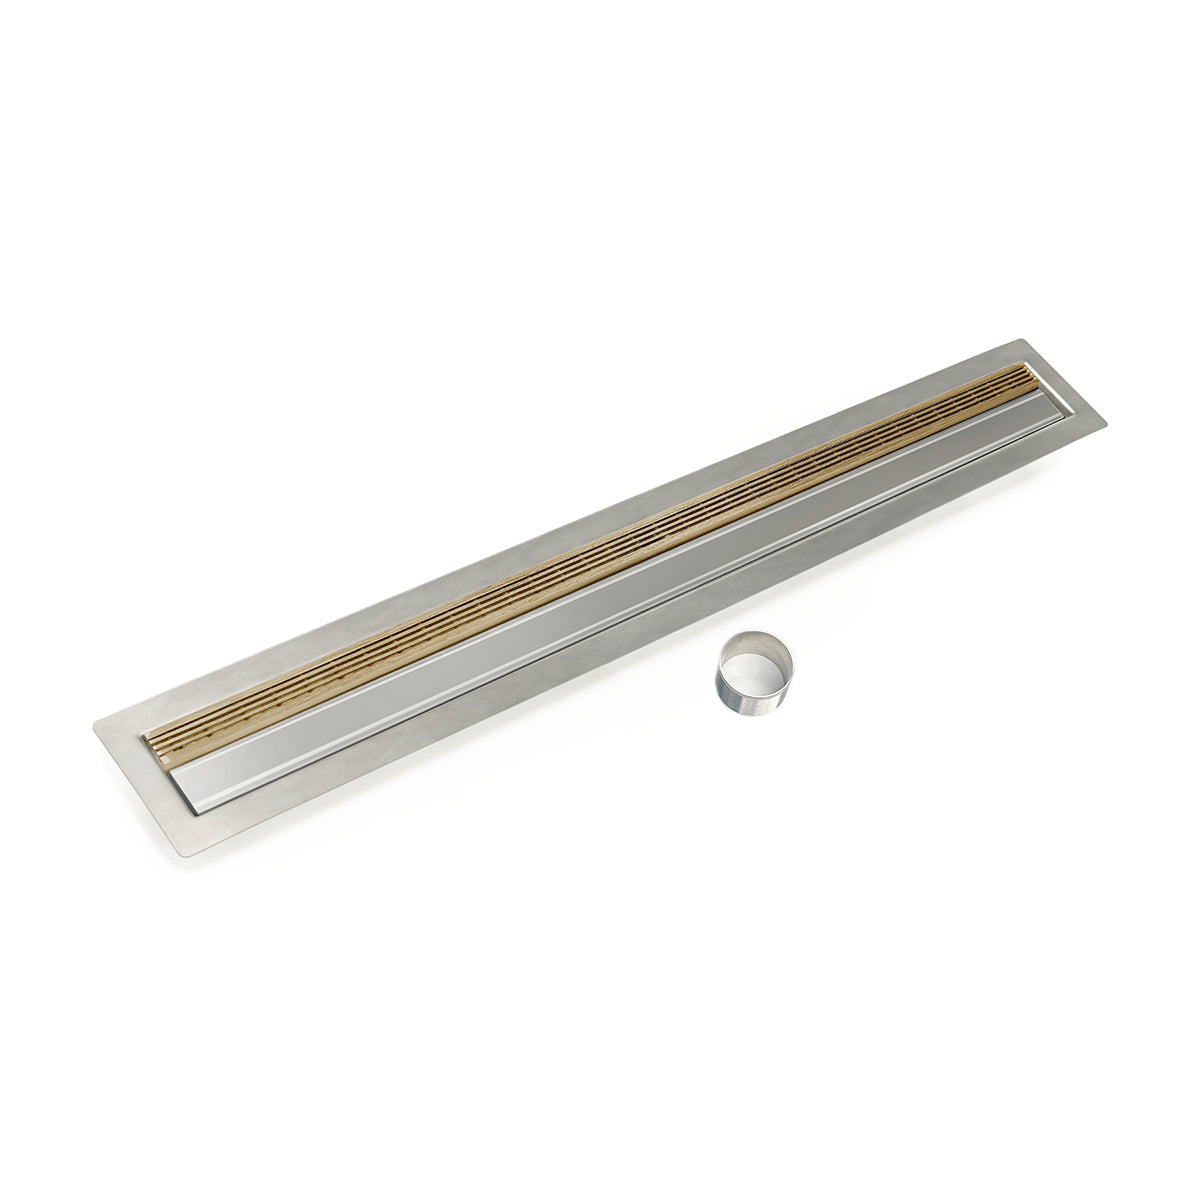 Infinity Drain 32" FCB Series Double Waterproofing Linear Drain Kit with 1" Wedge Wire Grate